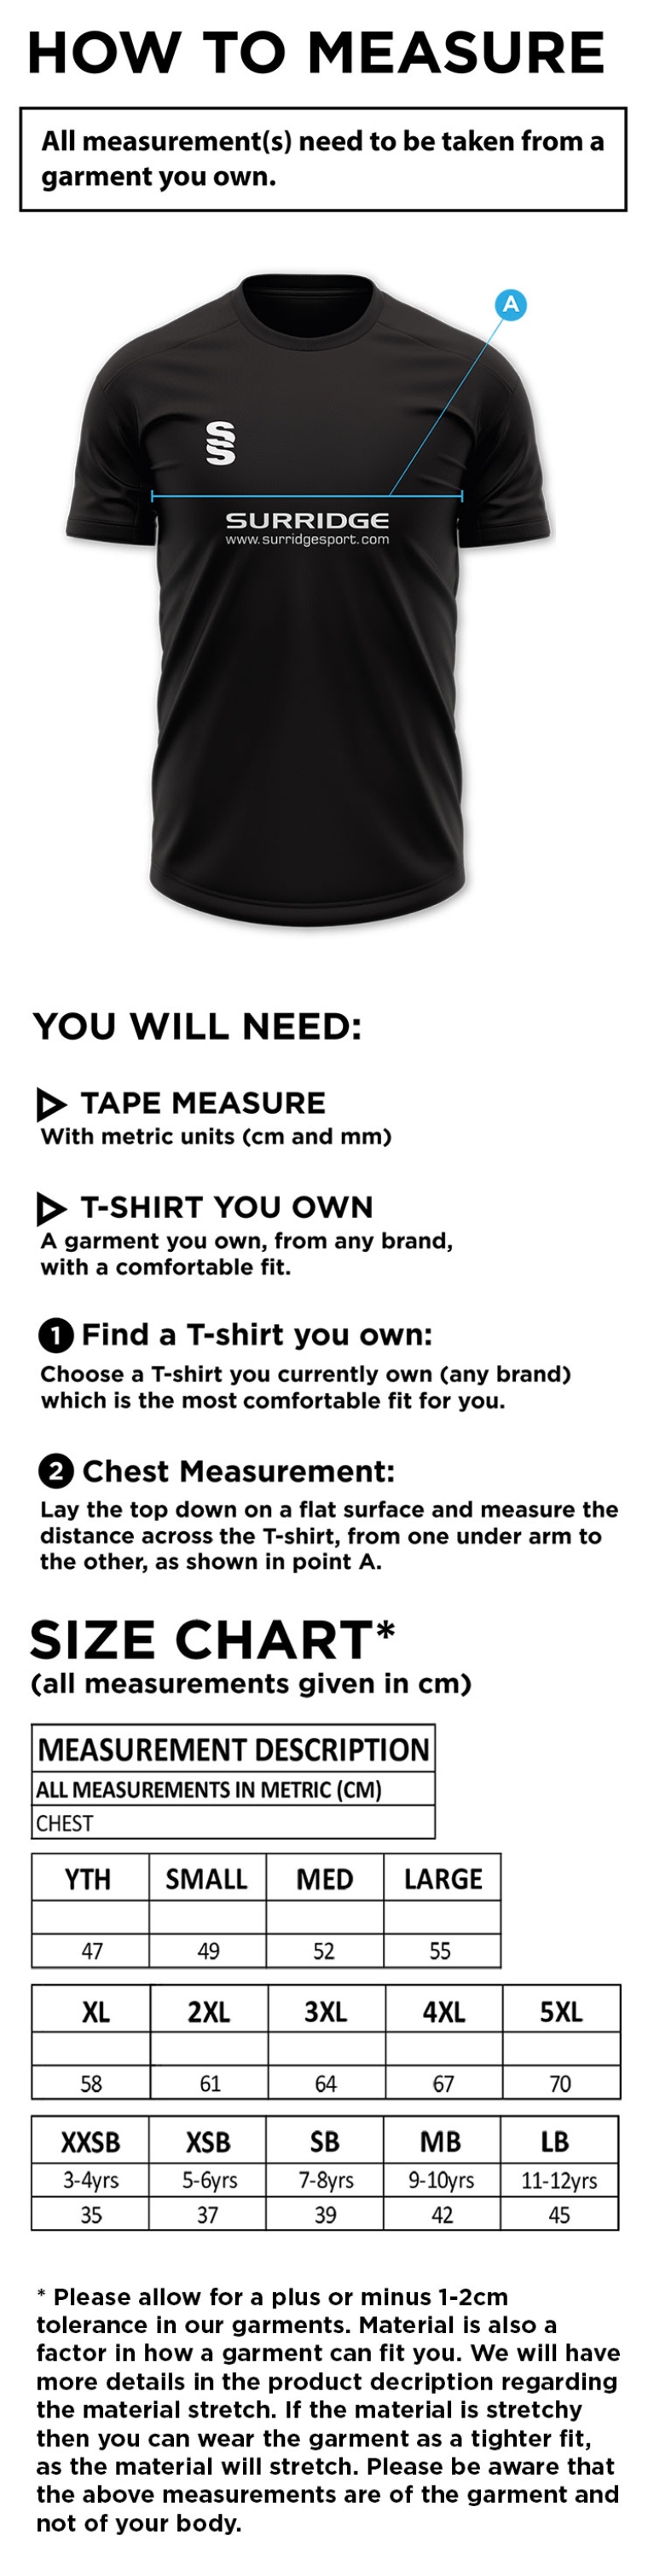 Youth's Camo Games Shirt : Bottle - Size Guide